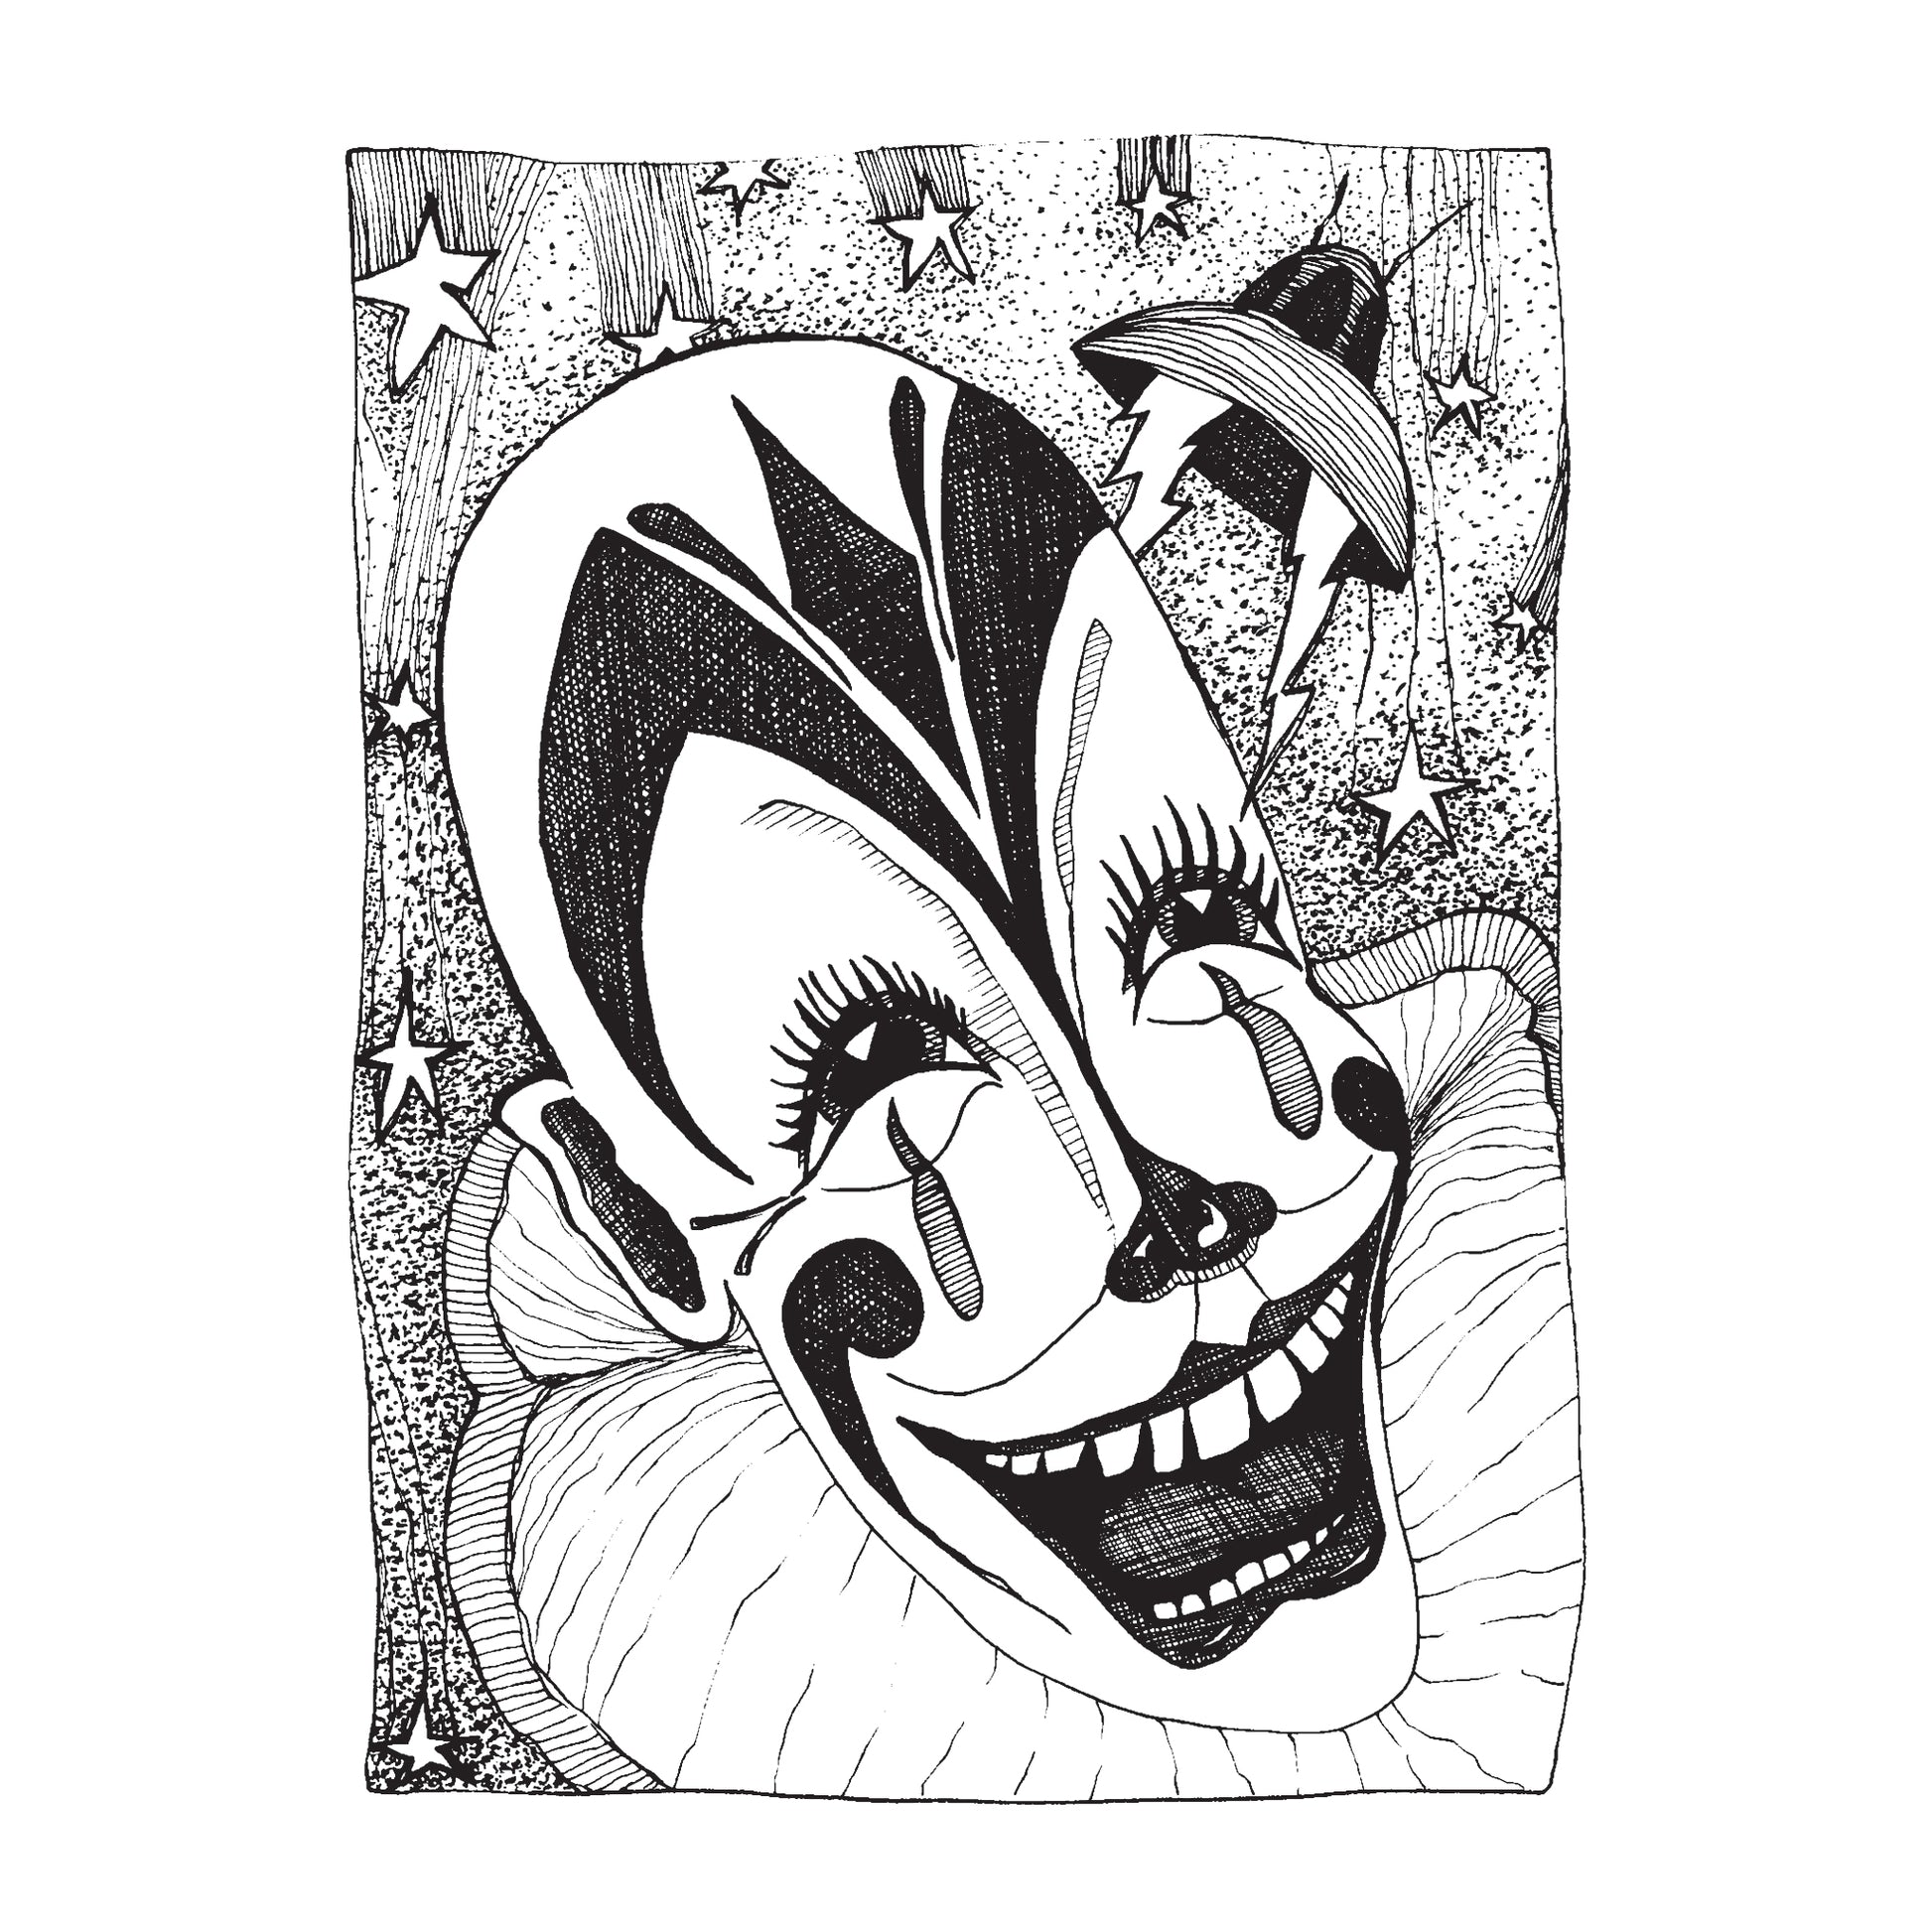 black and white illustration of an elated clown with crooked teeth, tears running down their face as they stare at a space ship near their head on a night with falling stars everywhere